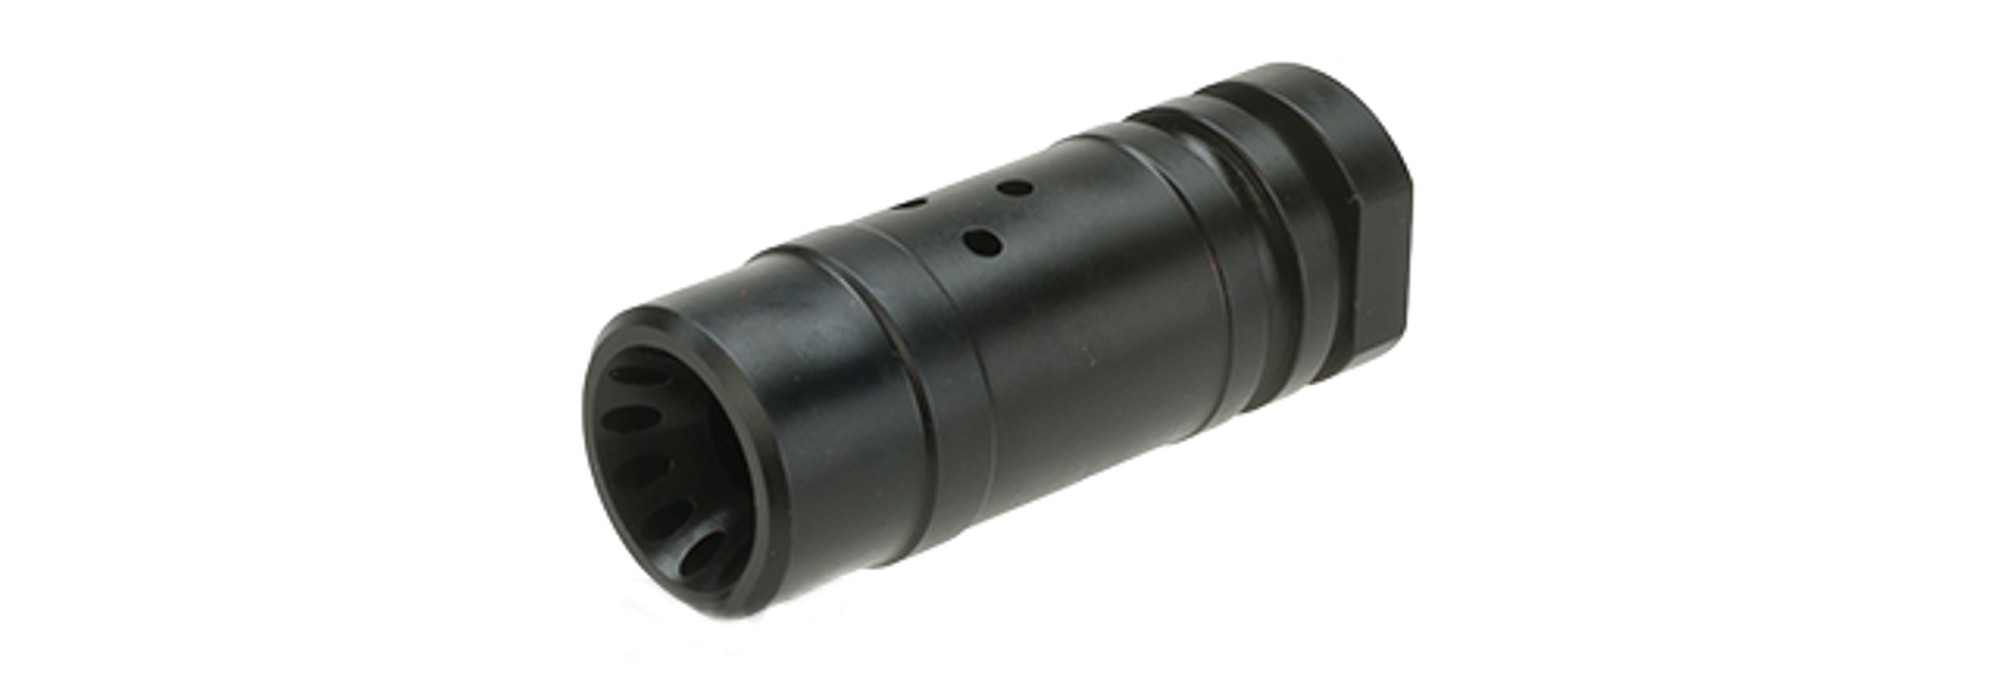 PTS Griffin M4SD Linear Compensator - 14mm Negative (CCW)